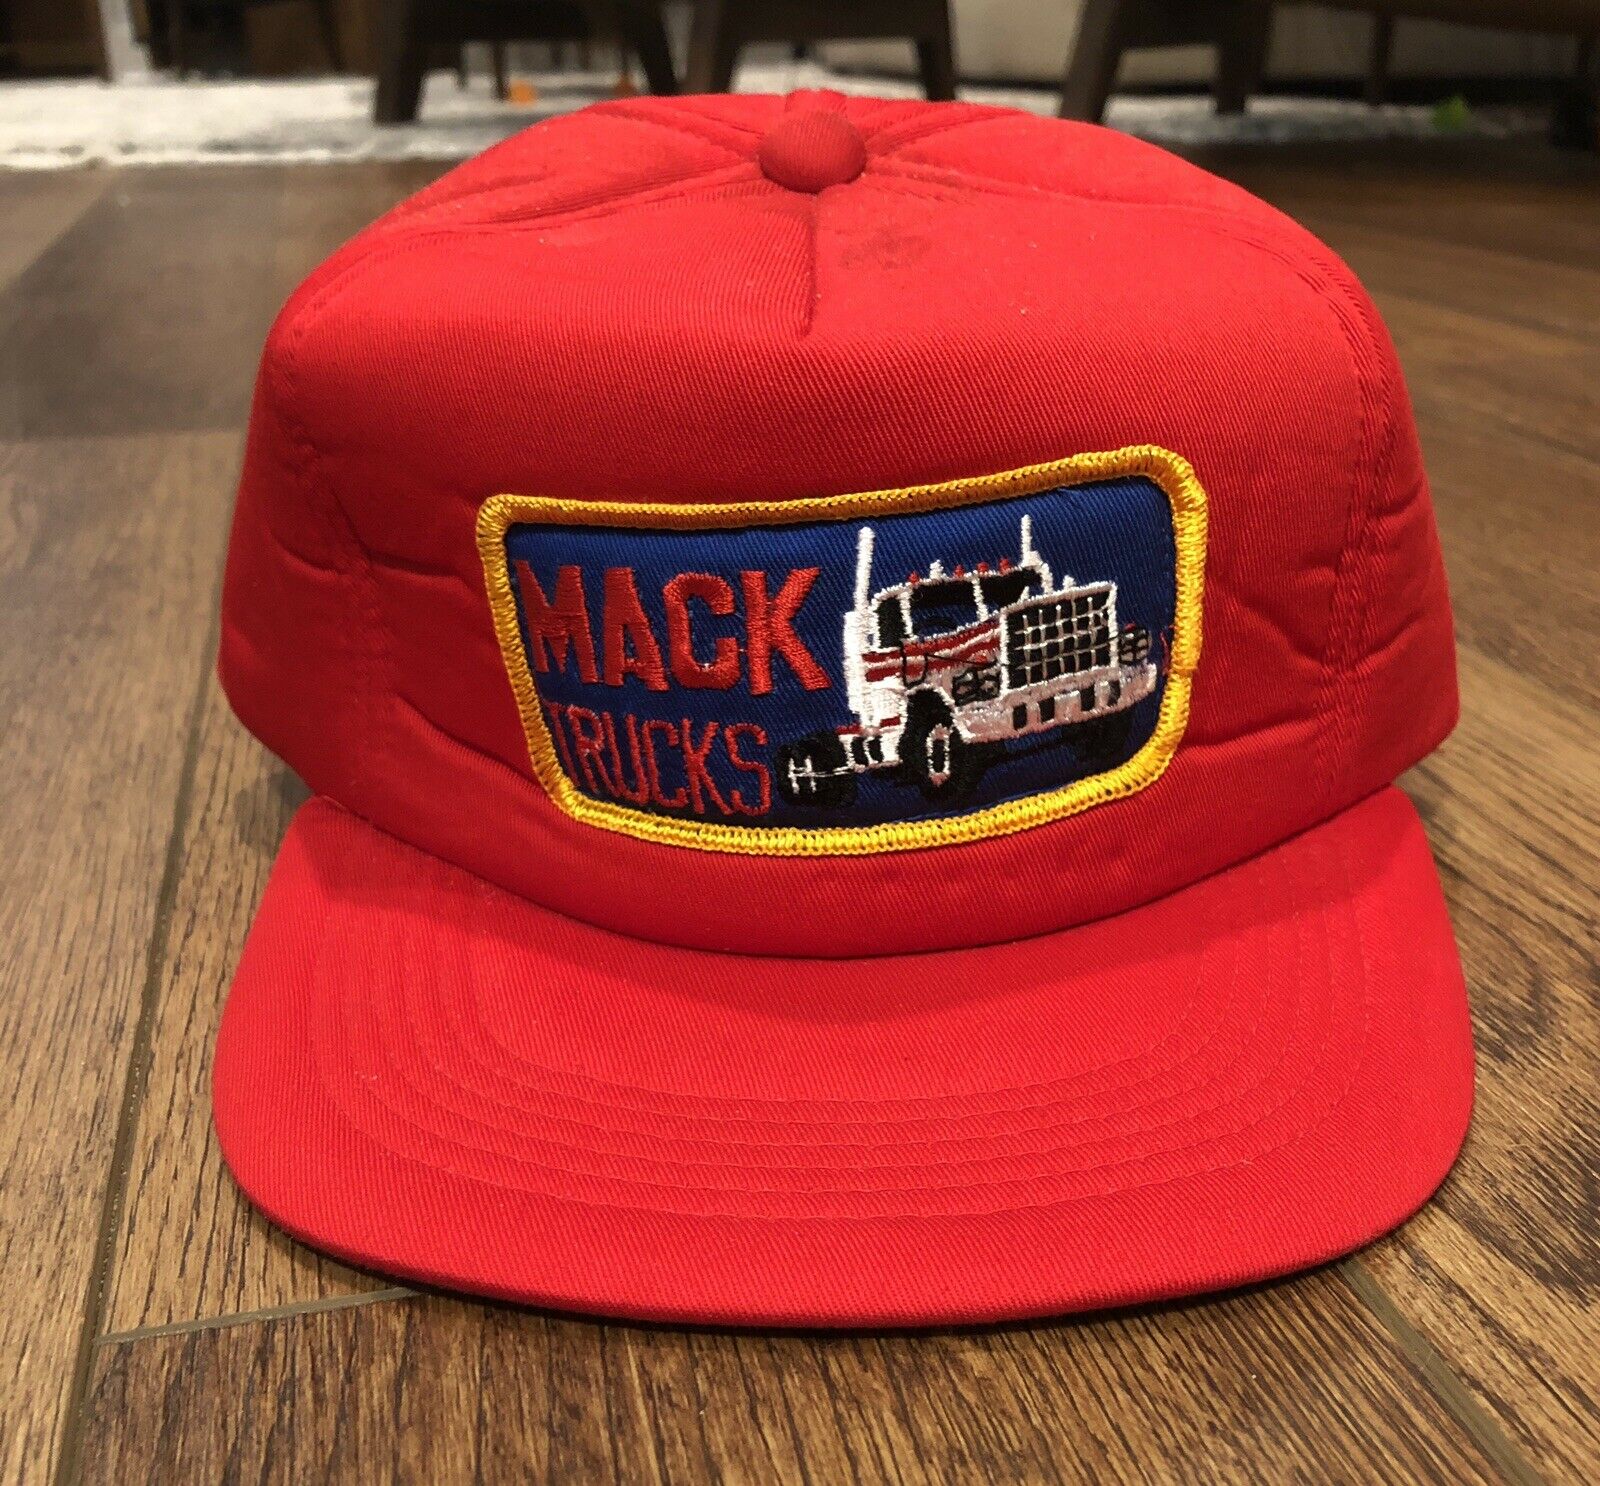 Vintage Red Mack Trucks Snapback Padded Hat Cap Embroidered Patch Big Rig Cotton